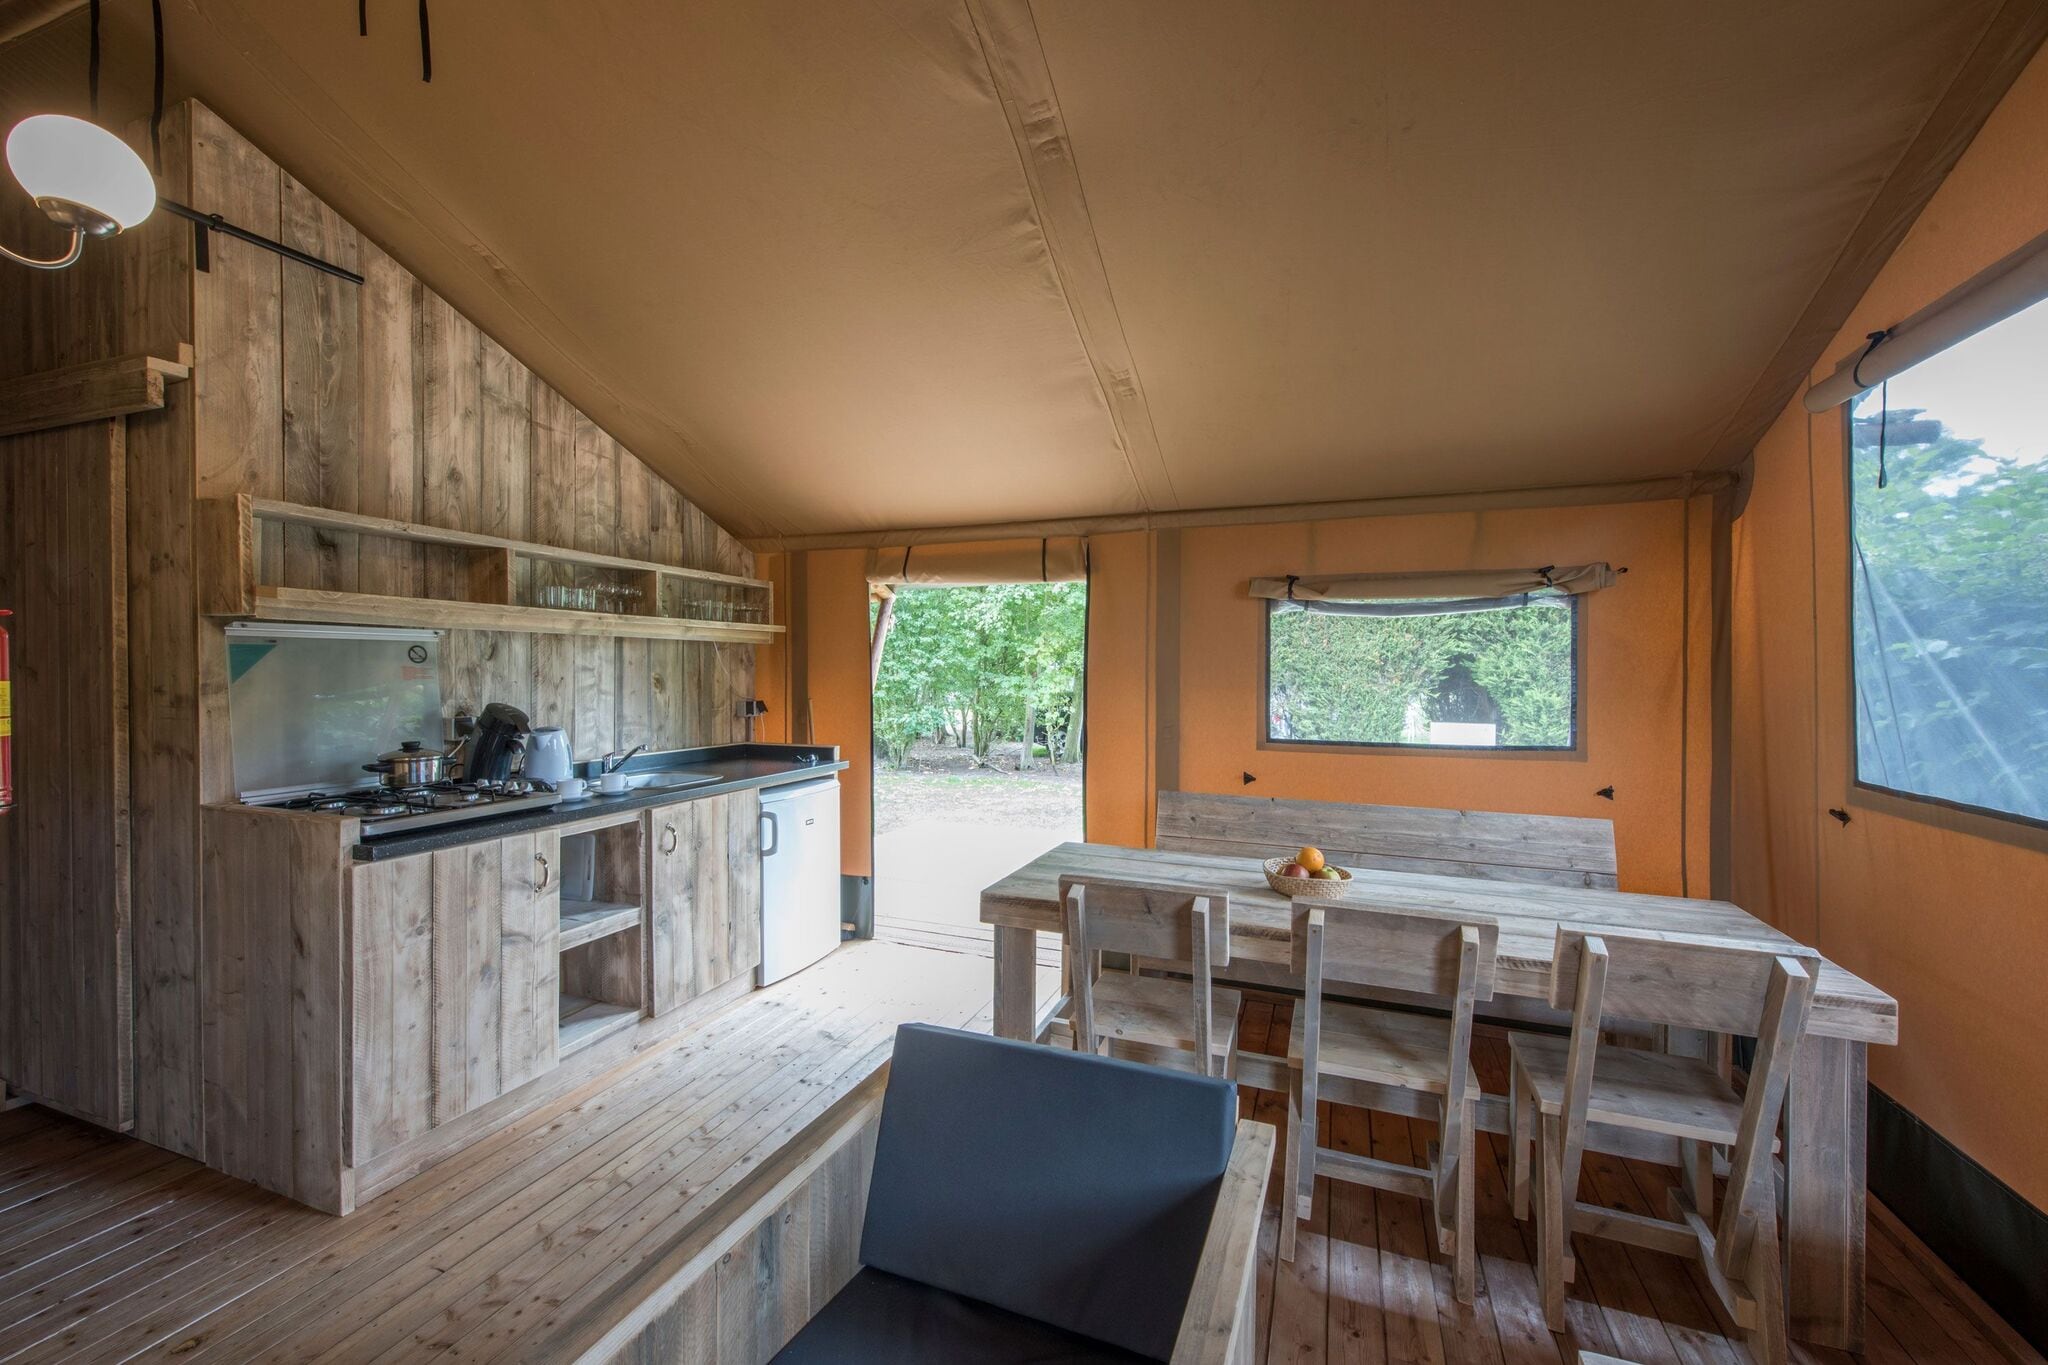 Nice safari tent with kitchen, 12 km. from Eindhoven